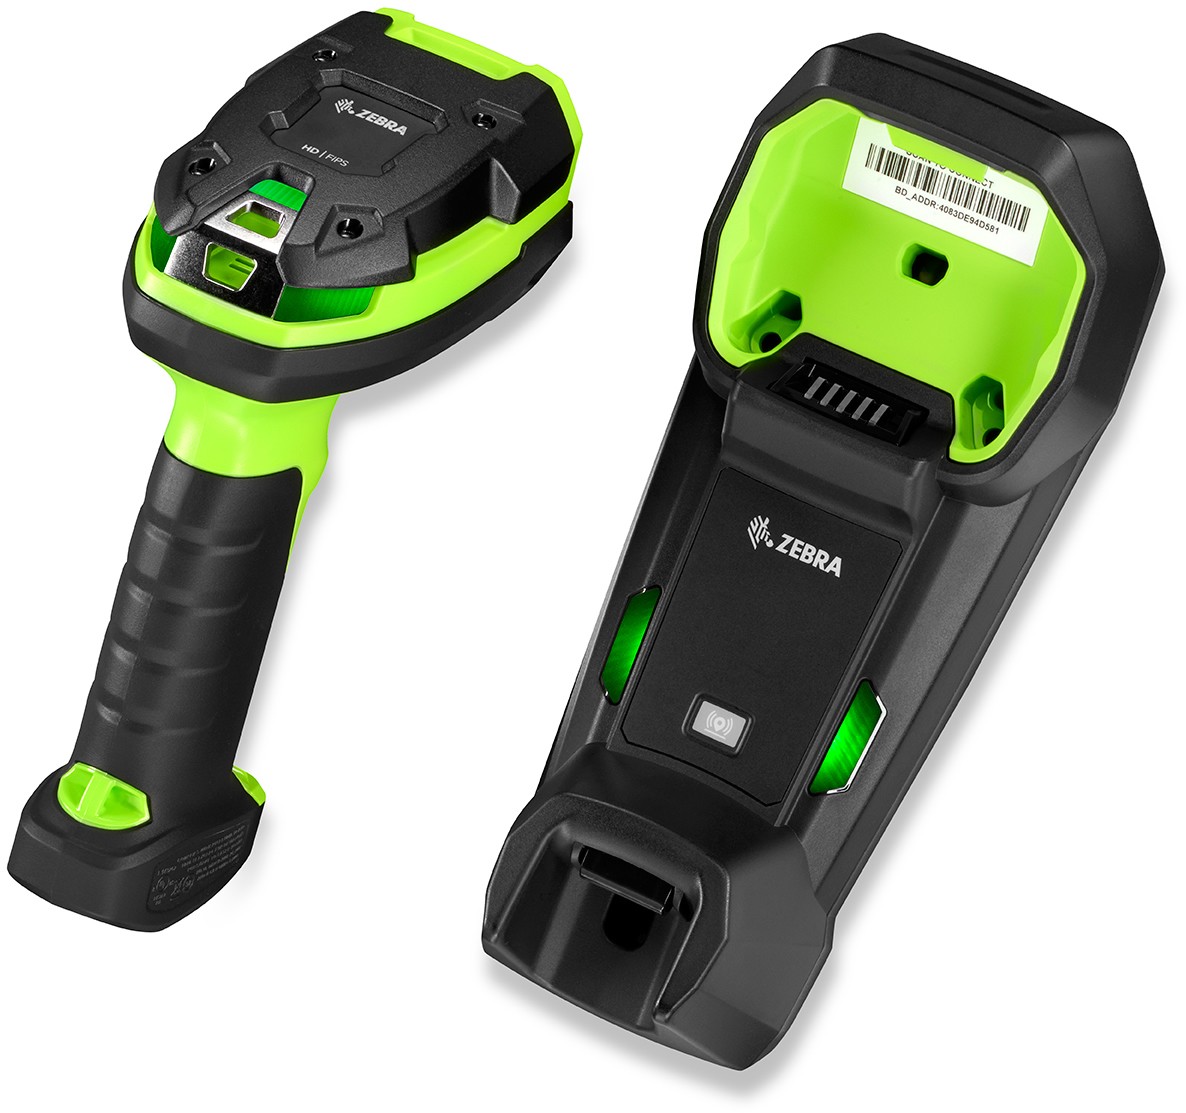 LI3678: RUGGED, LINEAR IMAGER, EXTENDED RANGE, CORDLESS, FIPS, INDUSTRIAL GREEN, VIBRATION - INDIA & KOREA ONLY